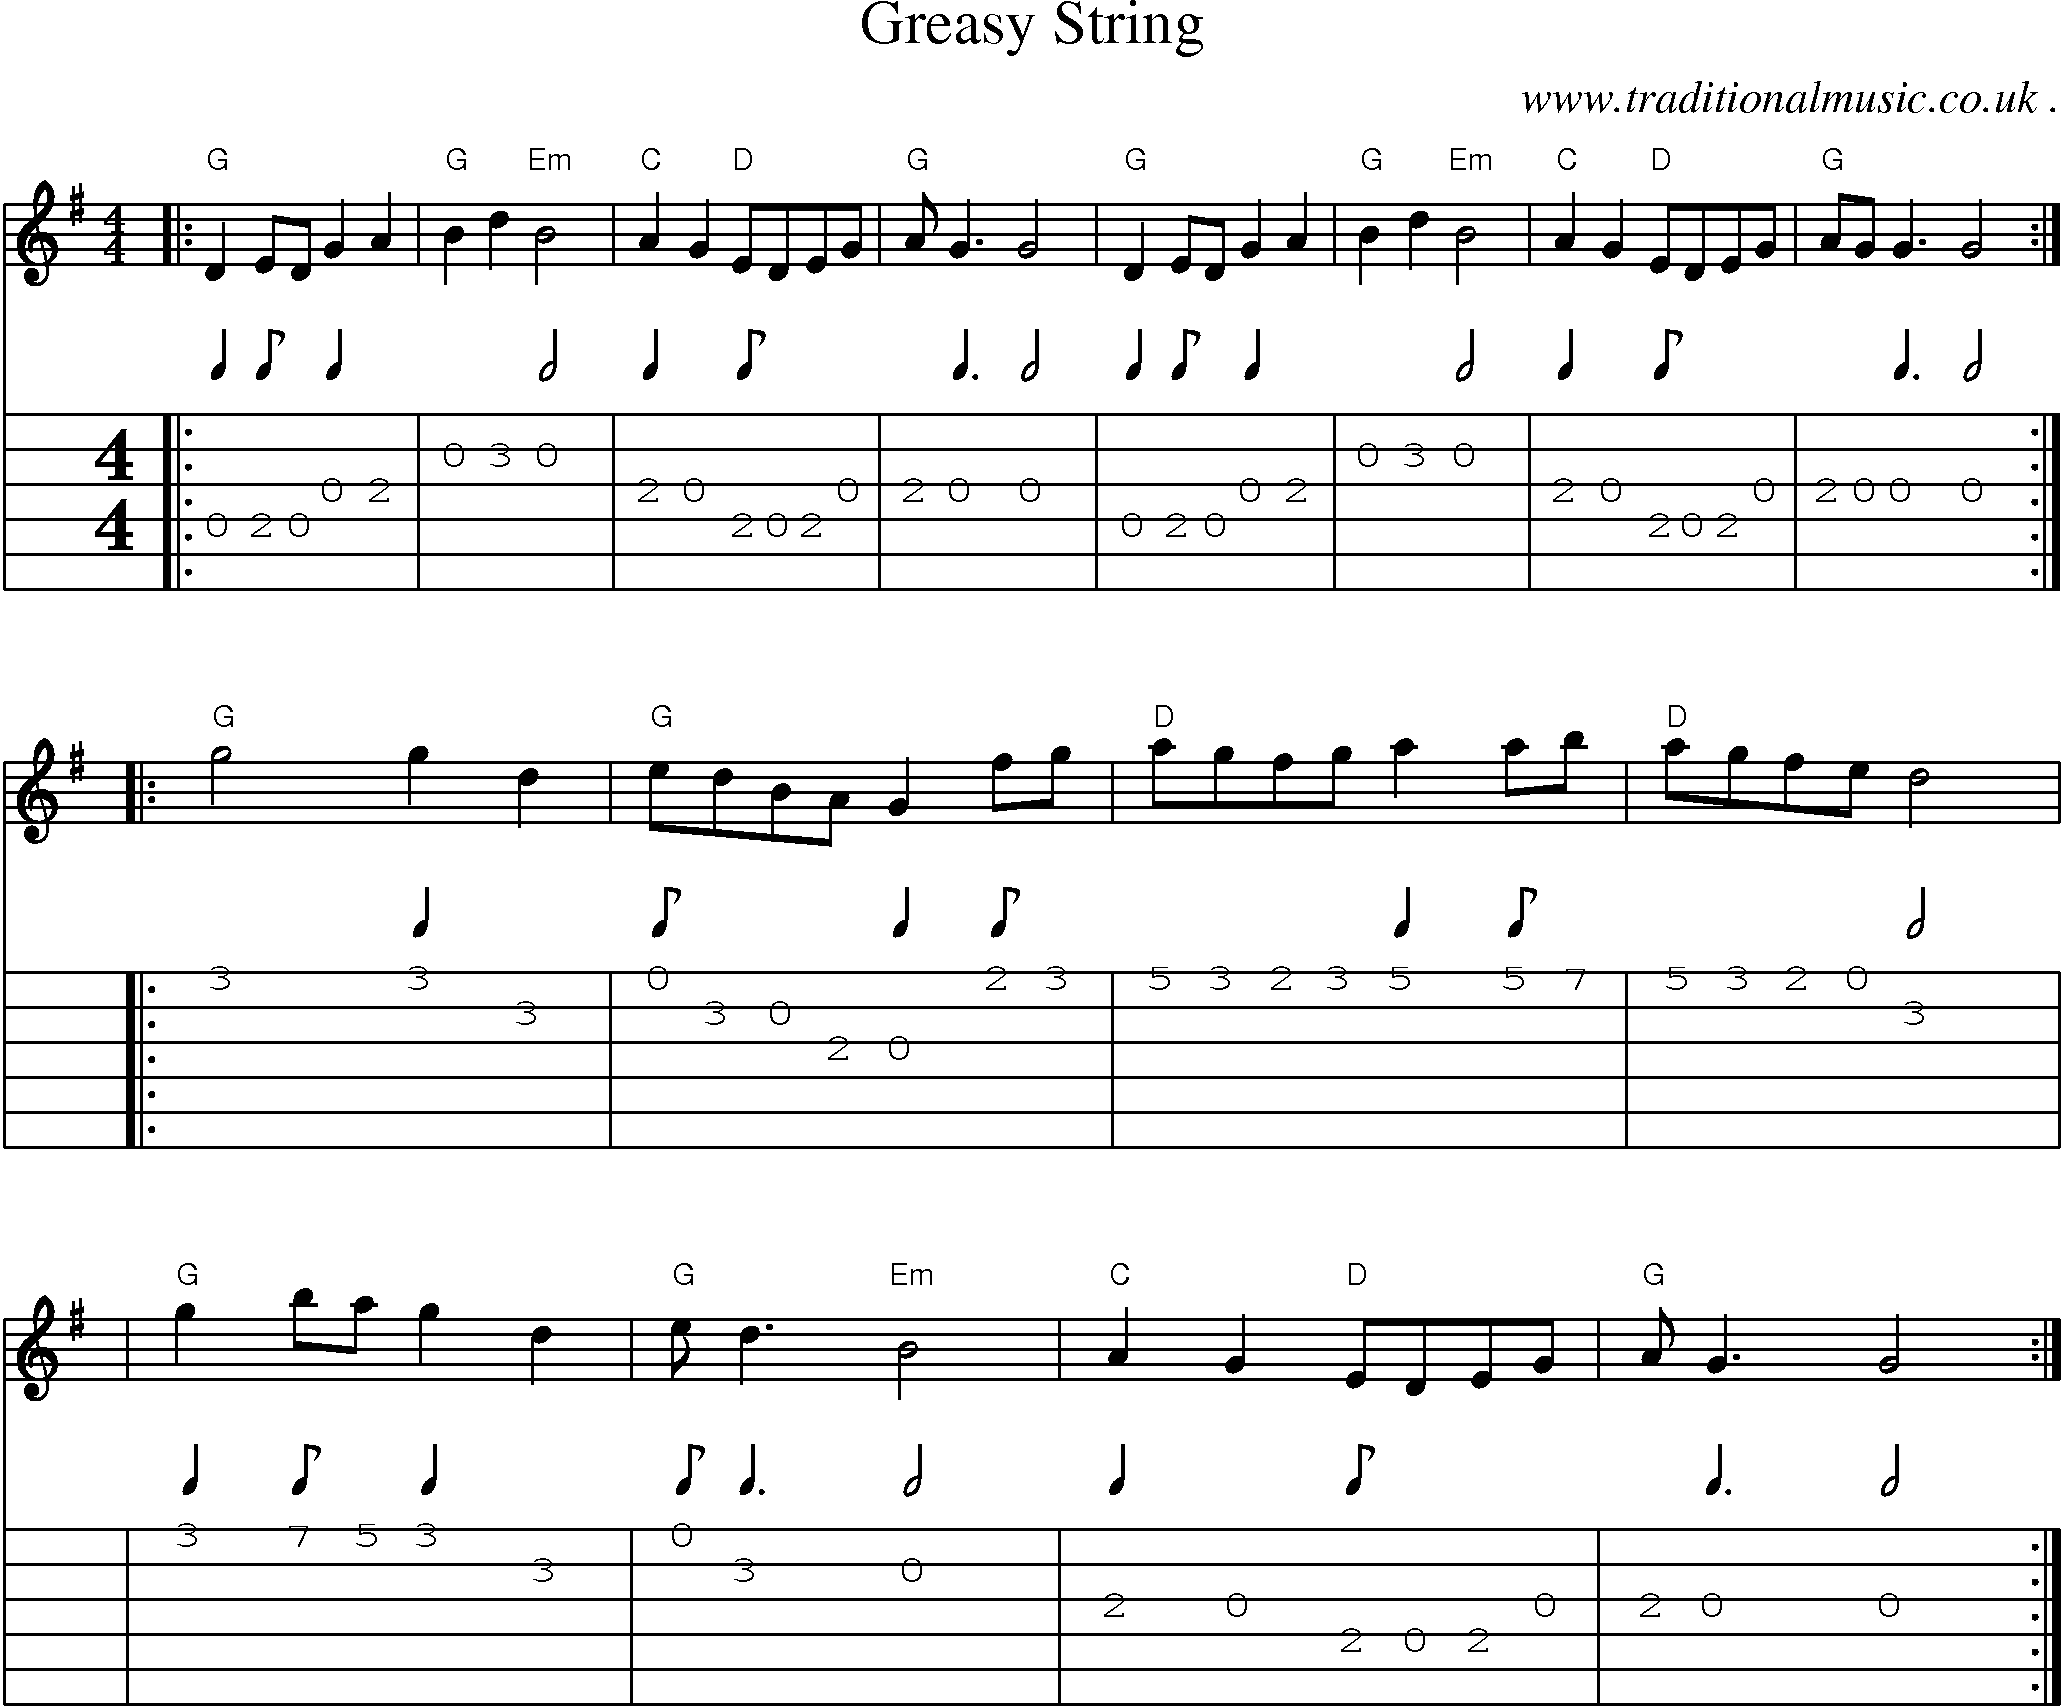 Music Score and Guitar Tabs for Greasy String